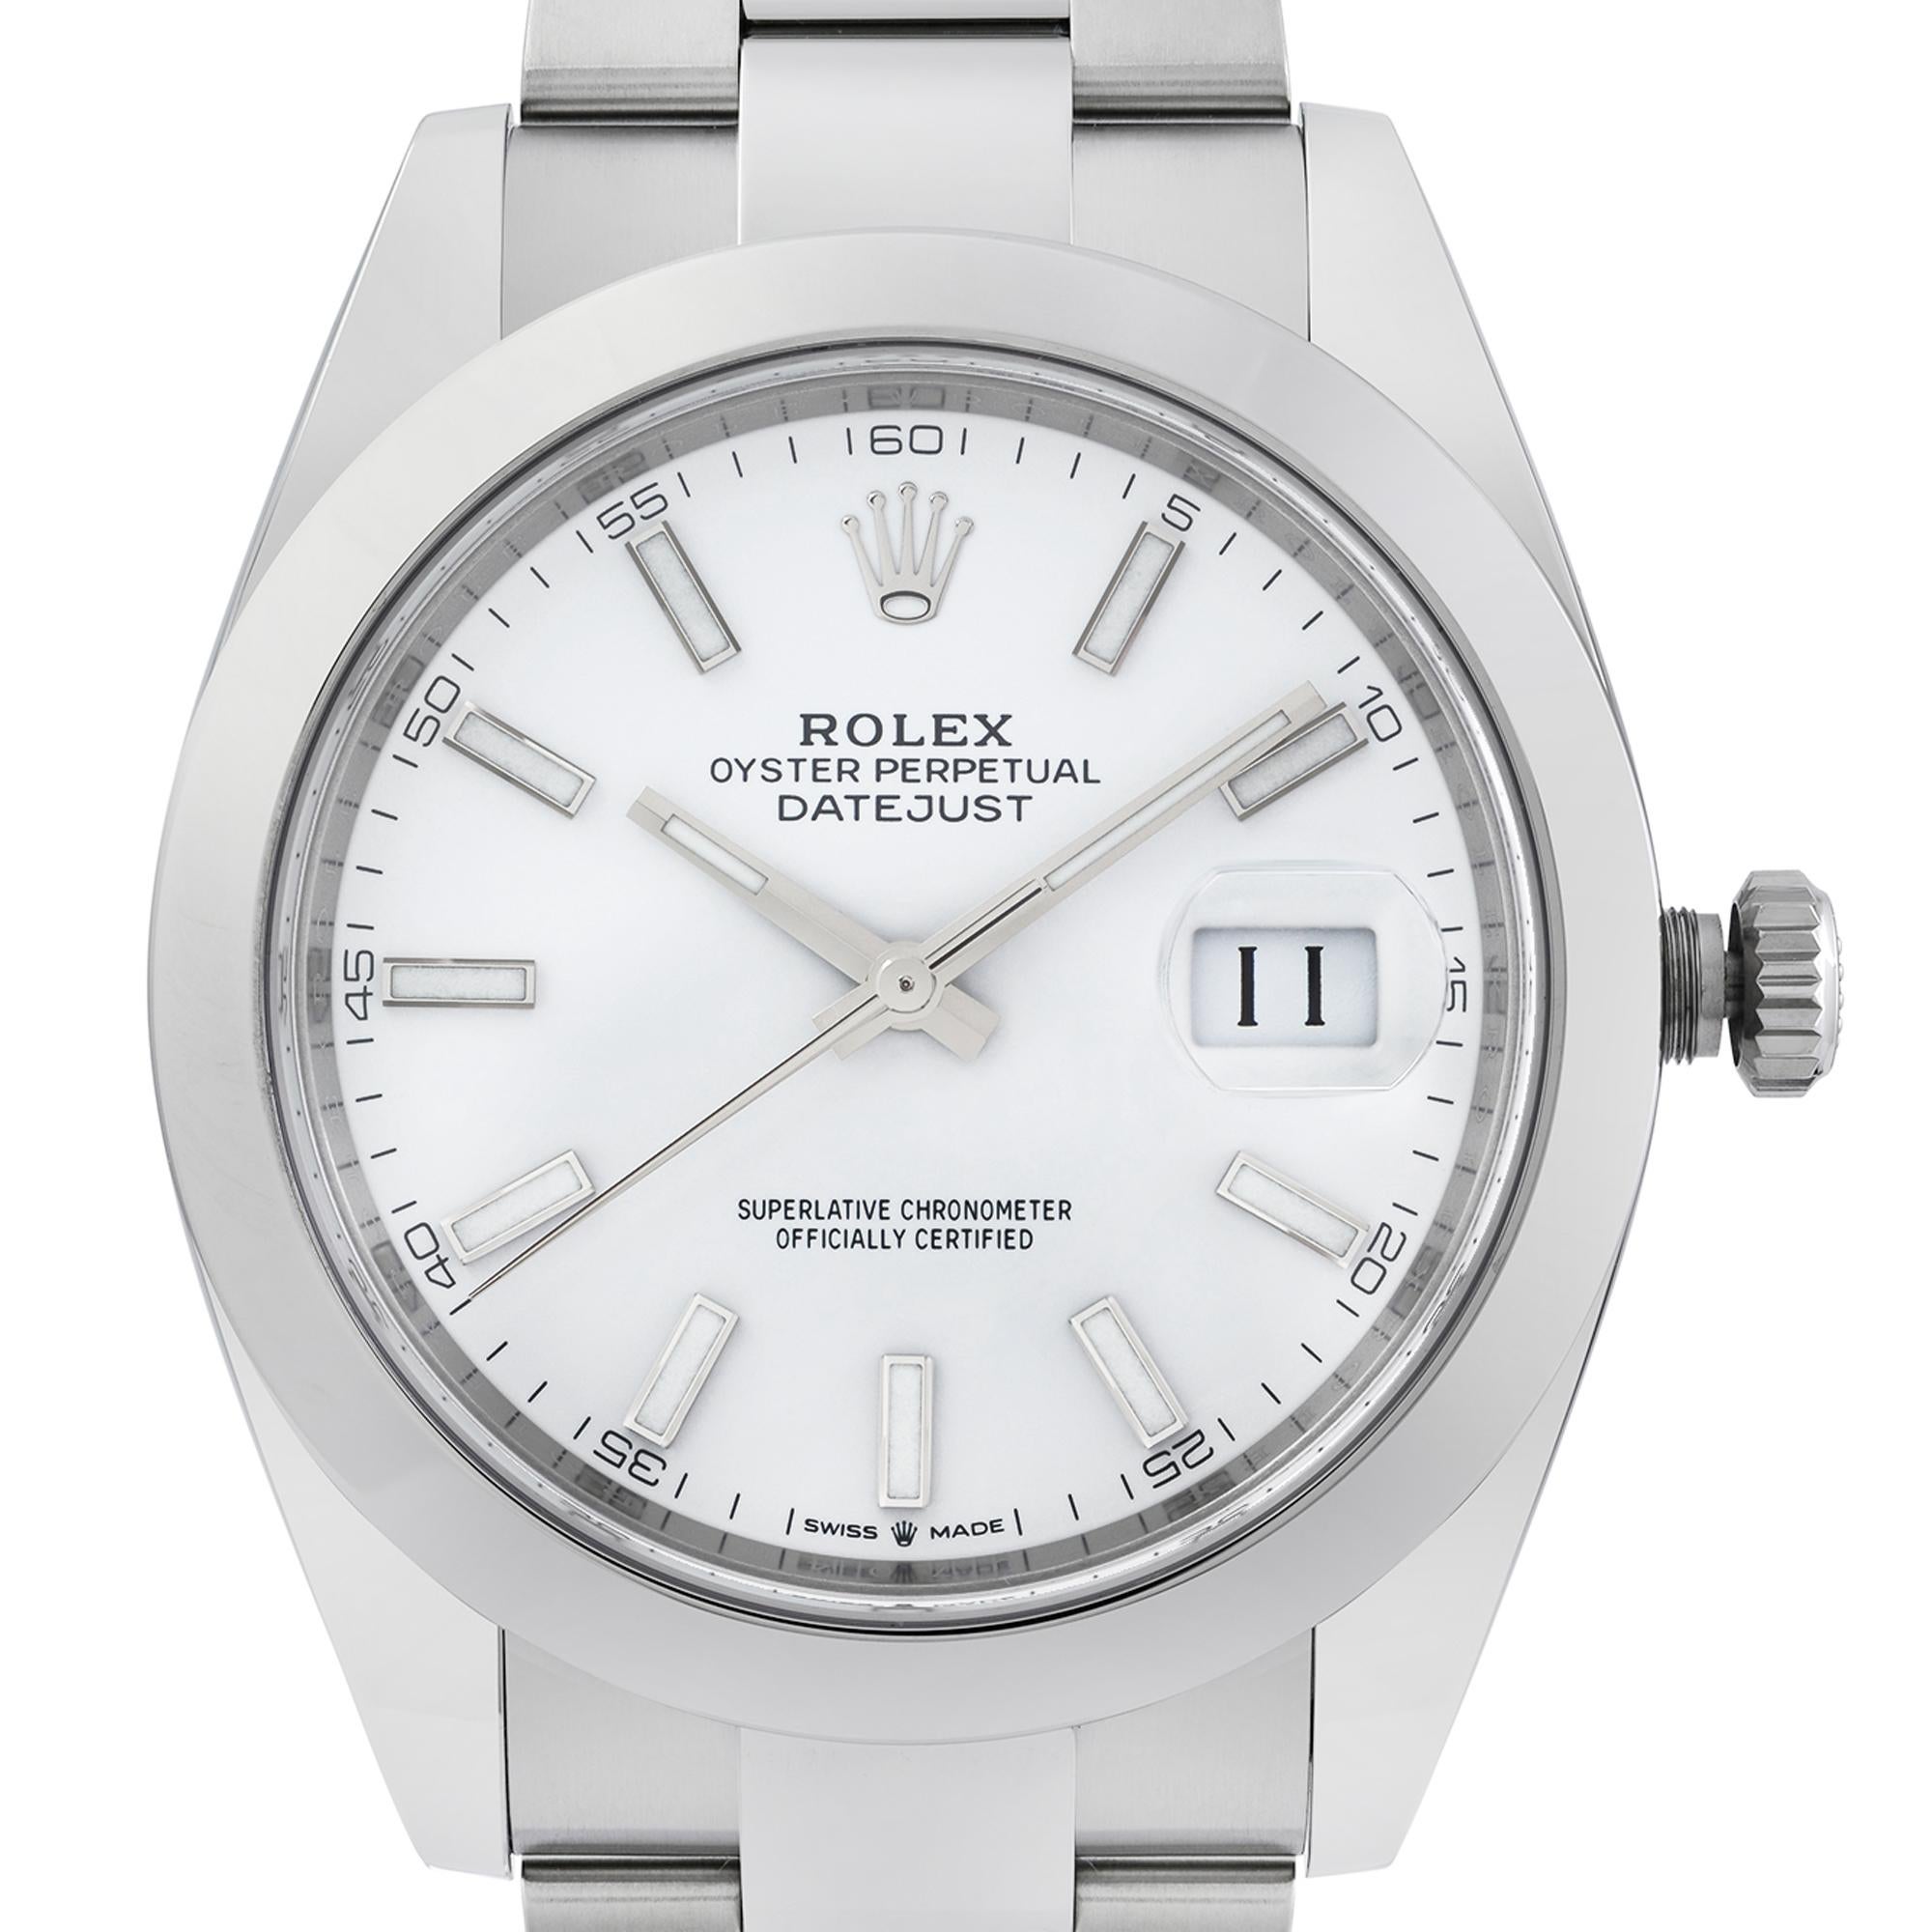 2020 Card. Super Mint Close to new Condition. . Pre-owned Rolex Datejust 41mm Steel White Dial Automatic Men's Watch.  Original Box and Papers are included Covered by a one-year Chronostore warranty.
Details:
Brand Rolex
Color White
Department